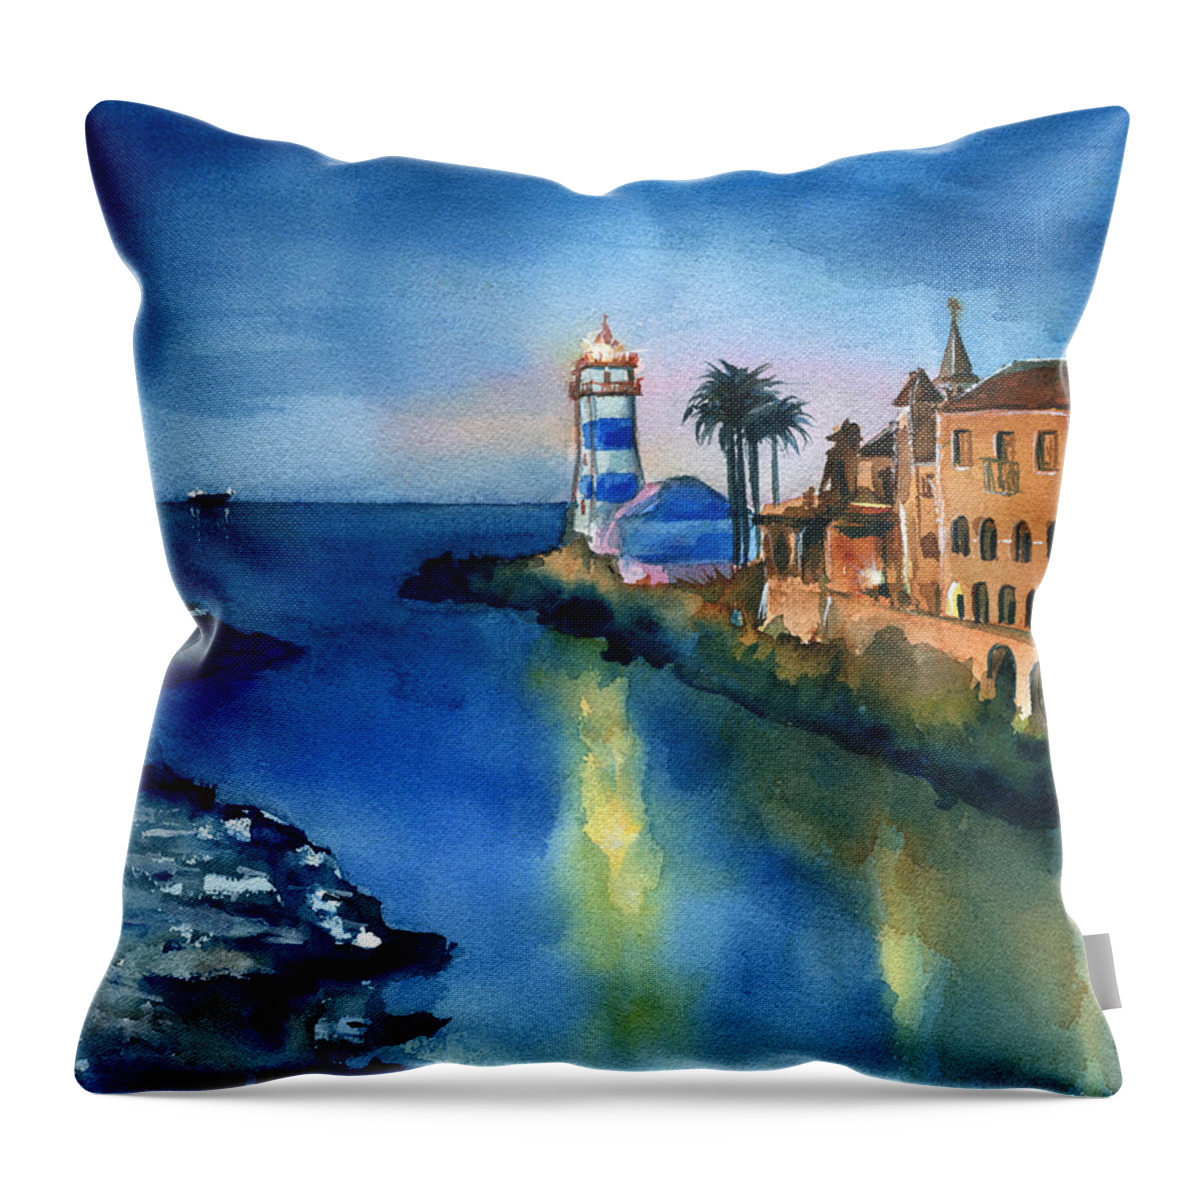 Portugal Throw Pillow featuring the painting Nightfall in Cascais Portugal by Dora Hathazi Mendes